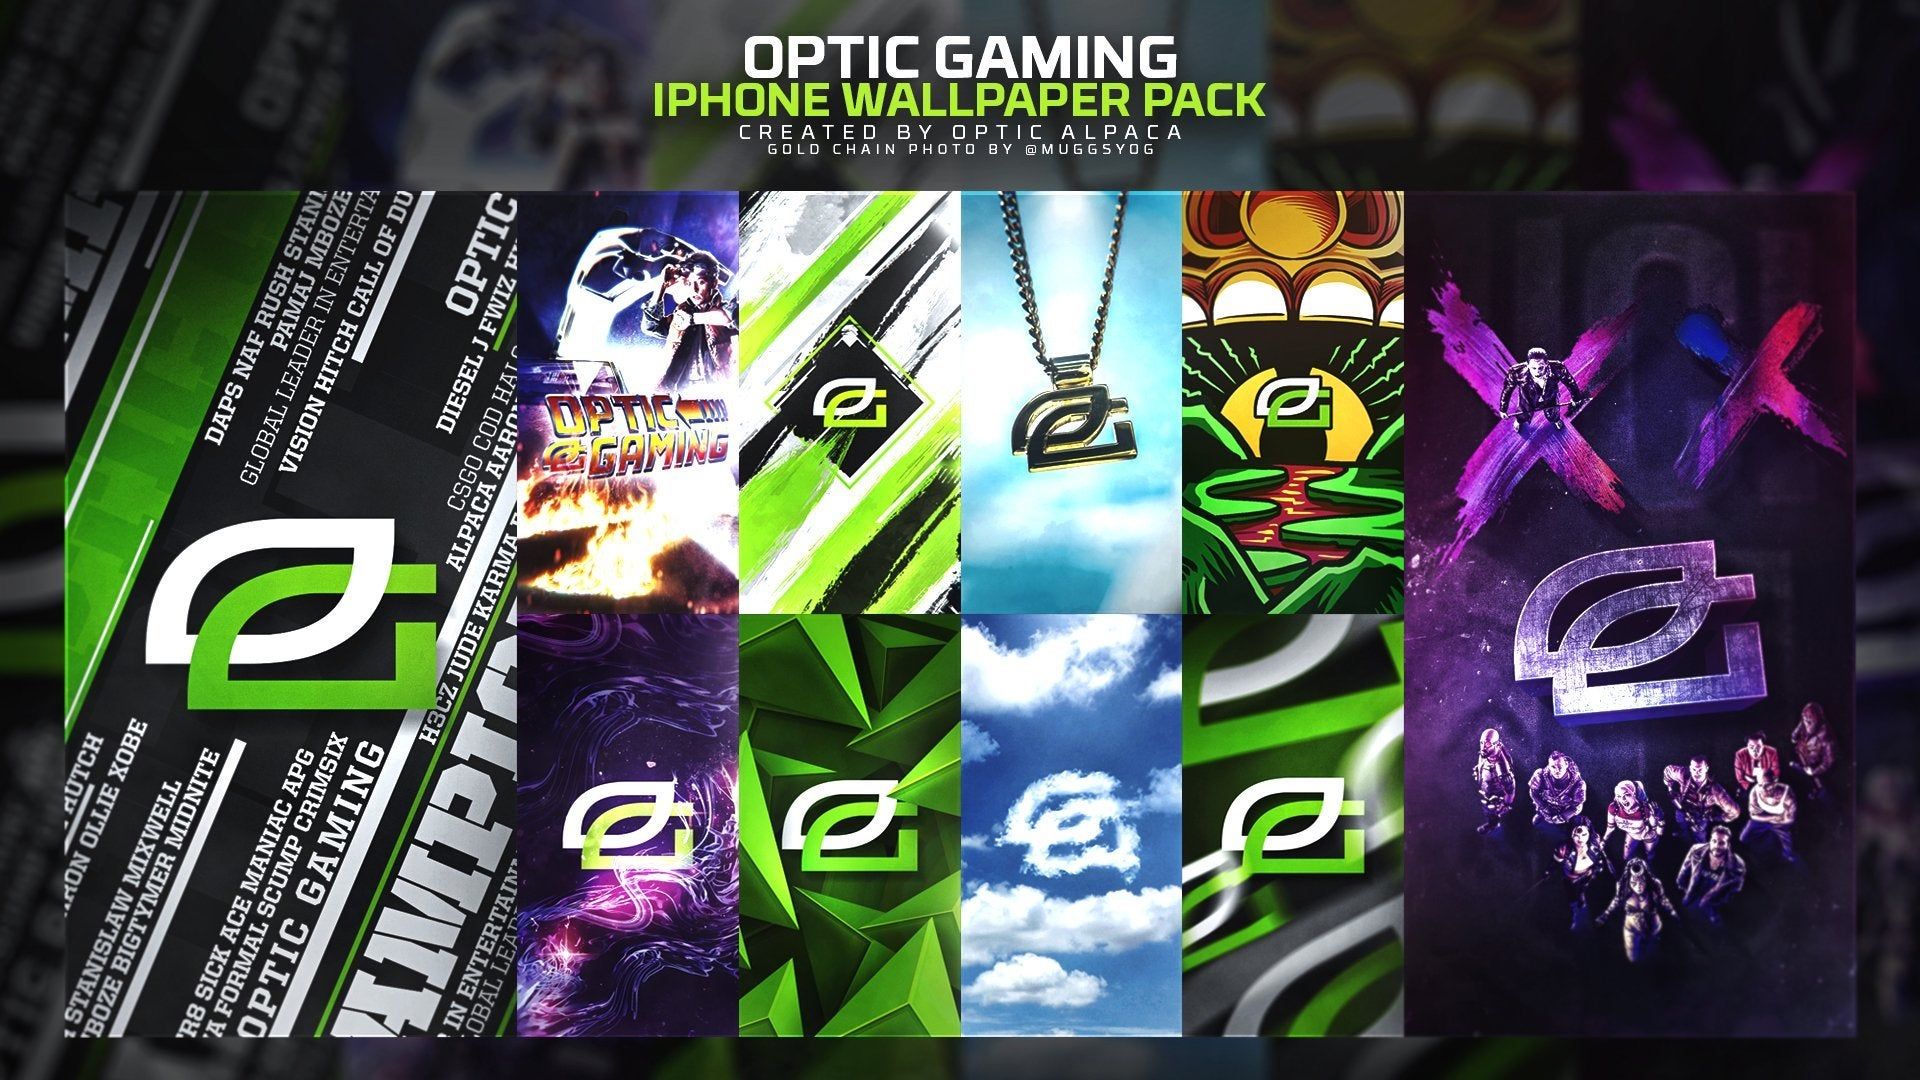 MISC OpTic Alpaca released a new iPhone wallpaper pack